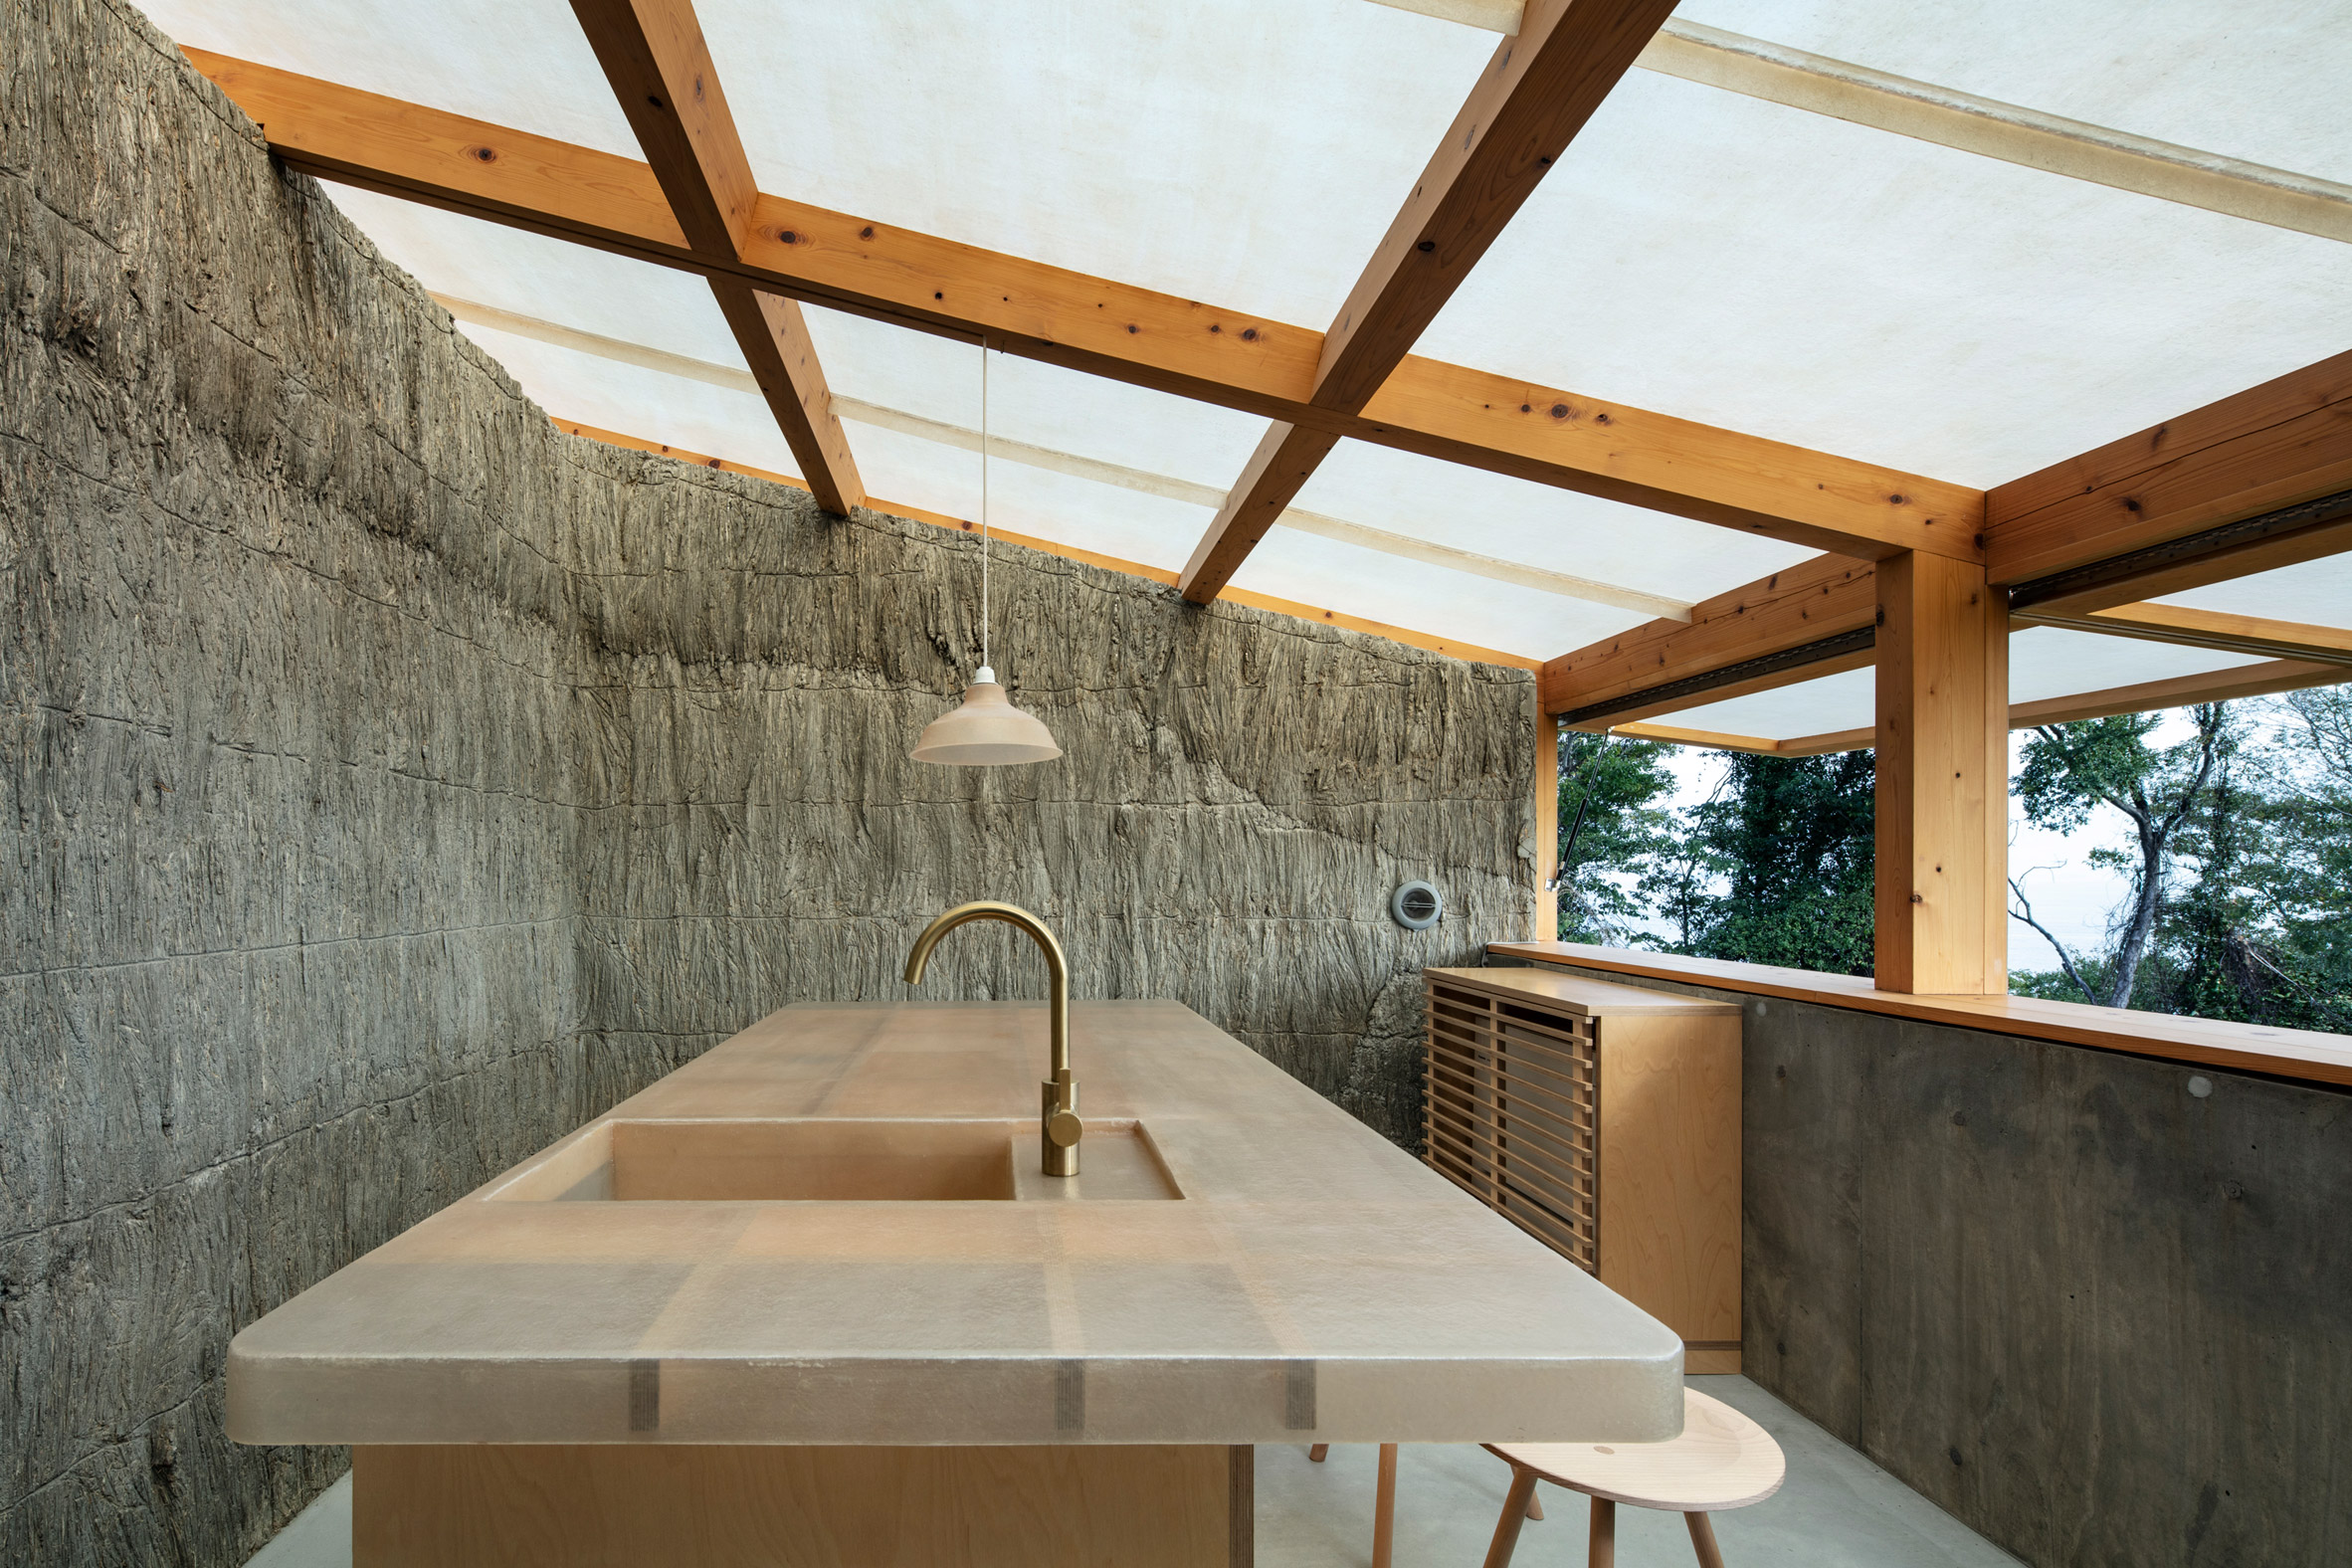 Interior of a kitchen space with a sloped translucent roof, textured walls and a large central island with a sink